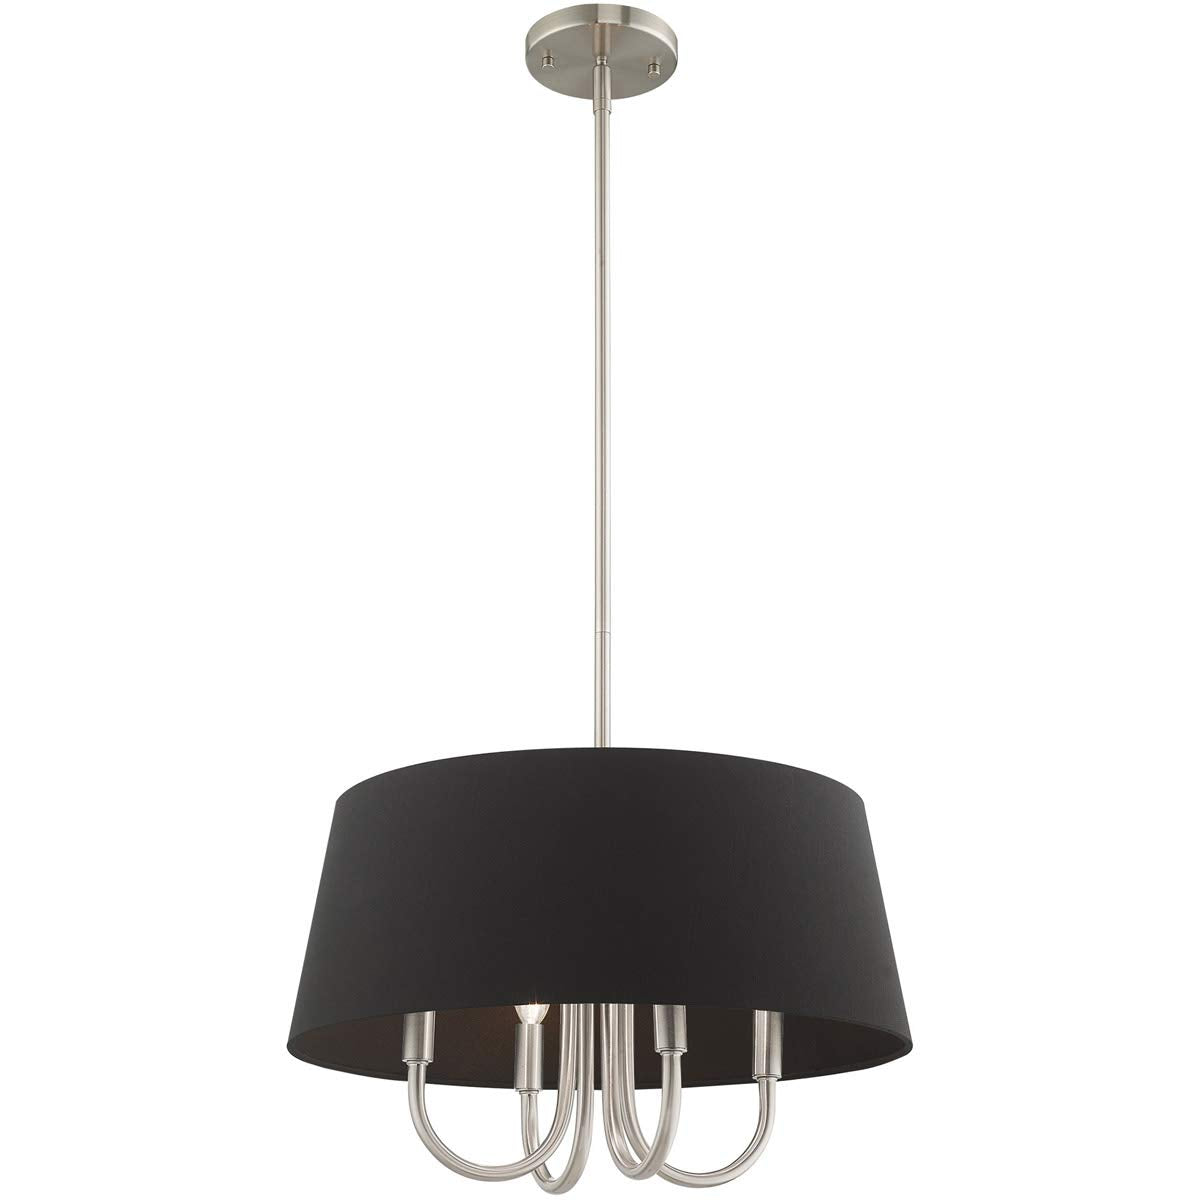 Livex Lighting 51354-91 Belclaire - Four Light Chandelier, Brushed Nickel Finish with Black Fabric Shade